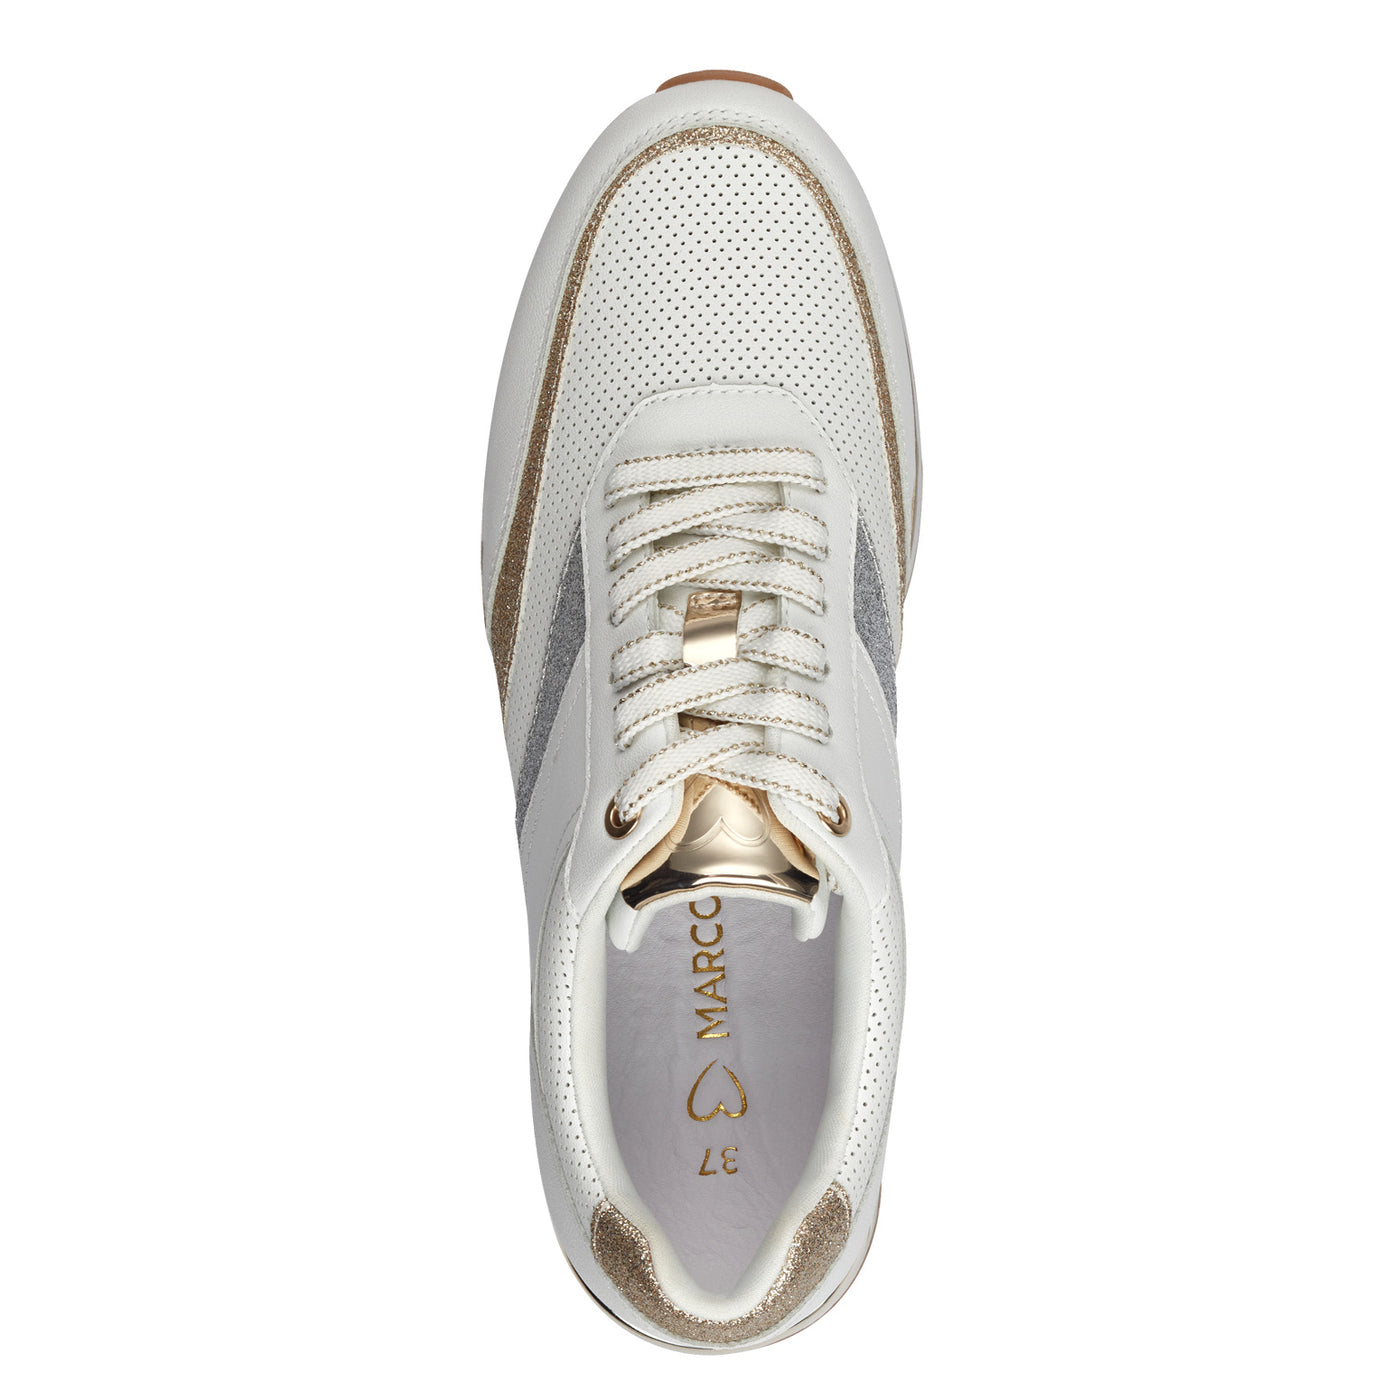 MARCO TOZZI - 23739-197 LACED FASHION RUNNER - WHITE/GOLD